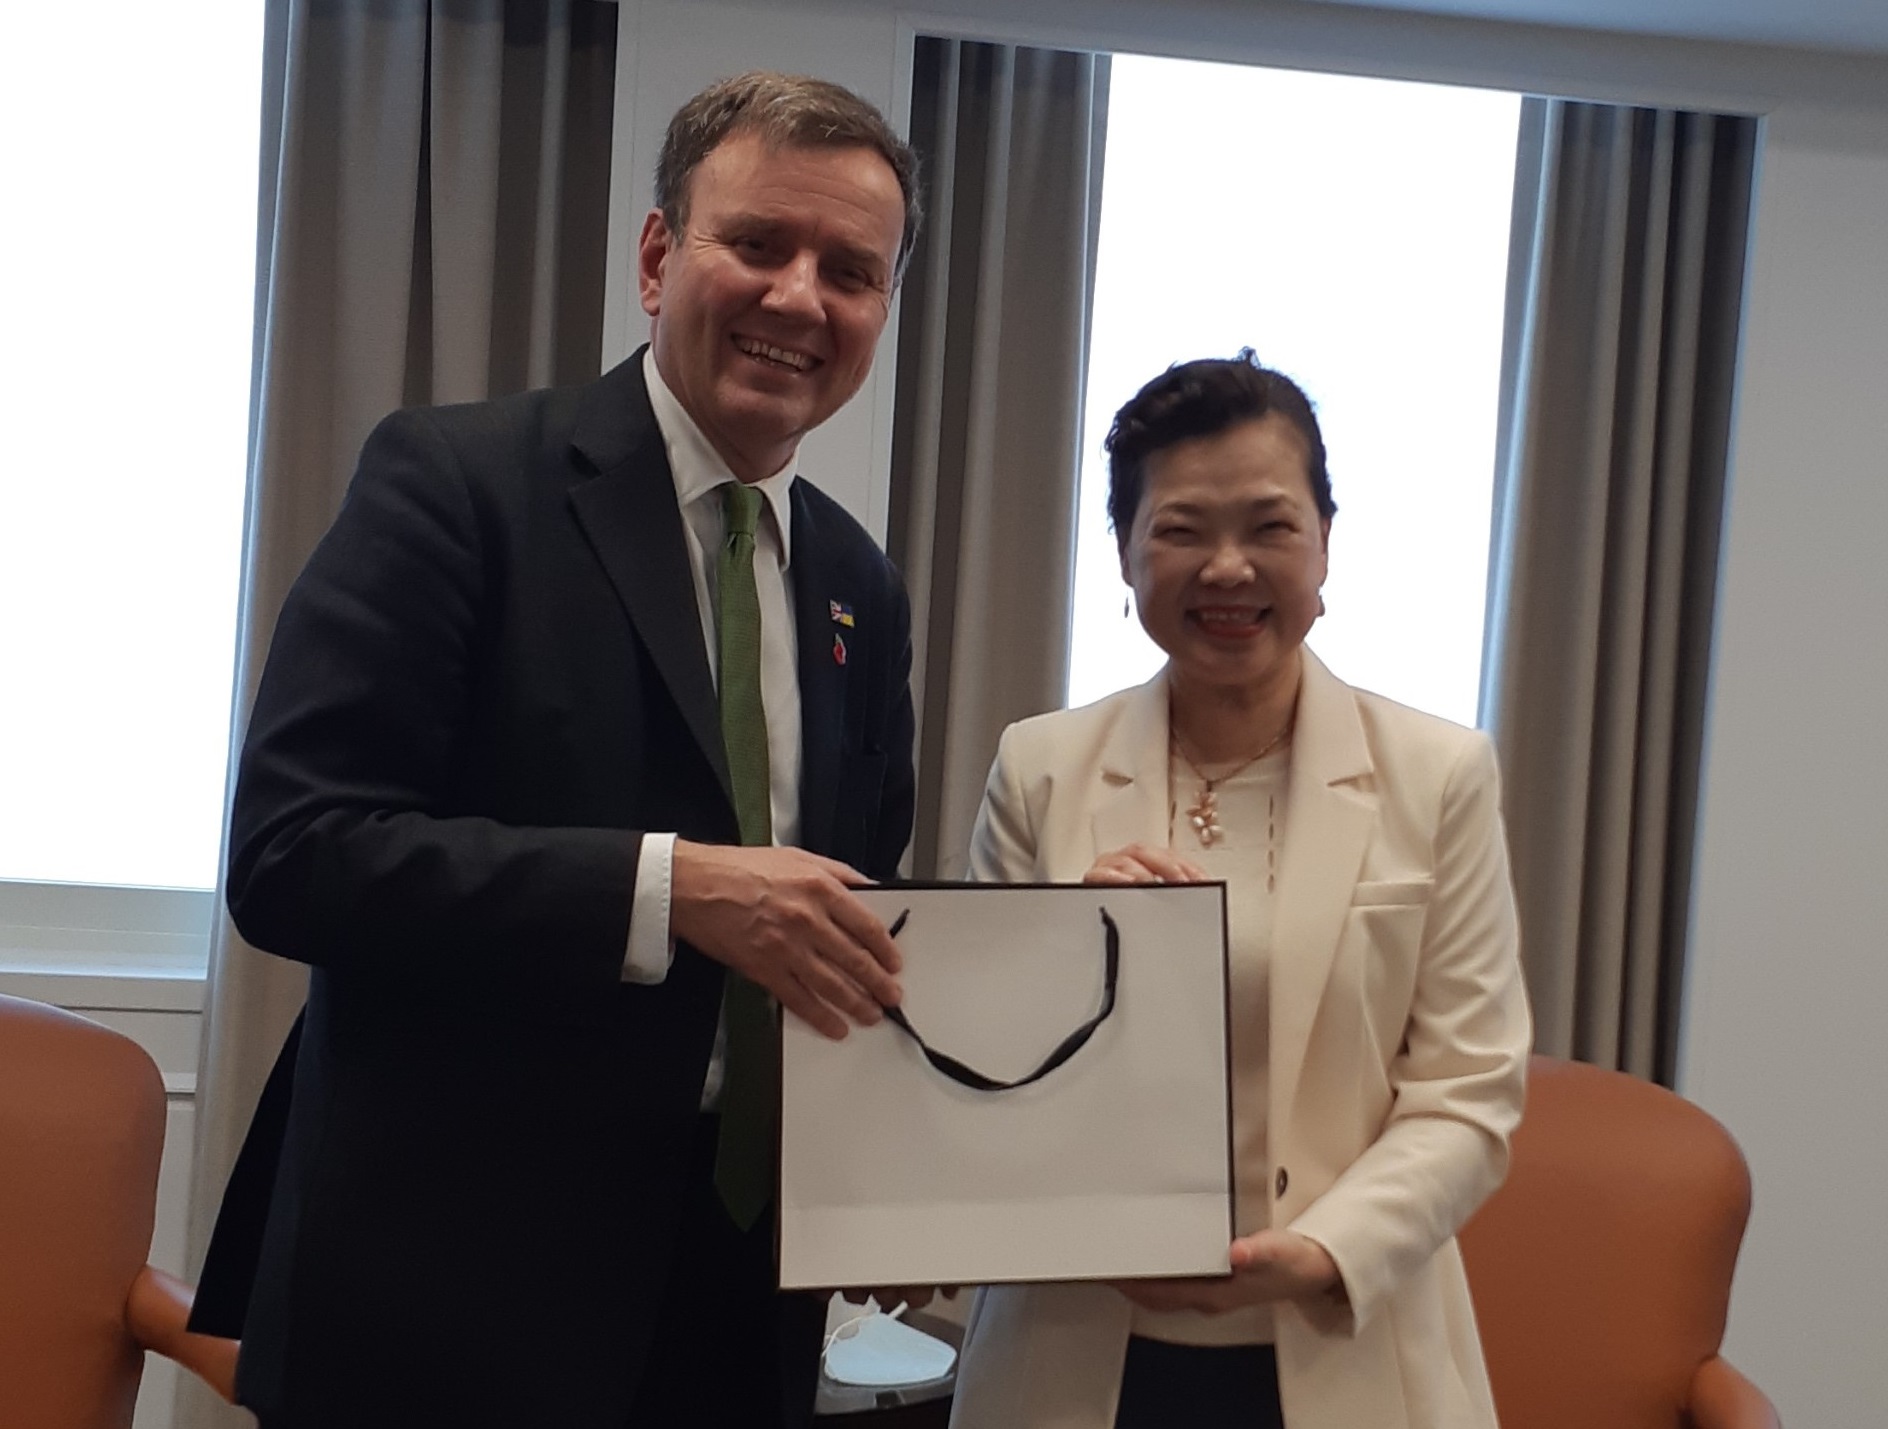 On November 9, MOEA Minister Ms. Mei-Hua Wang met with Mr. Greg Hands, Minister of State for Trade Policy of the DIT